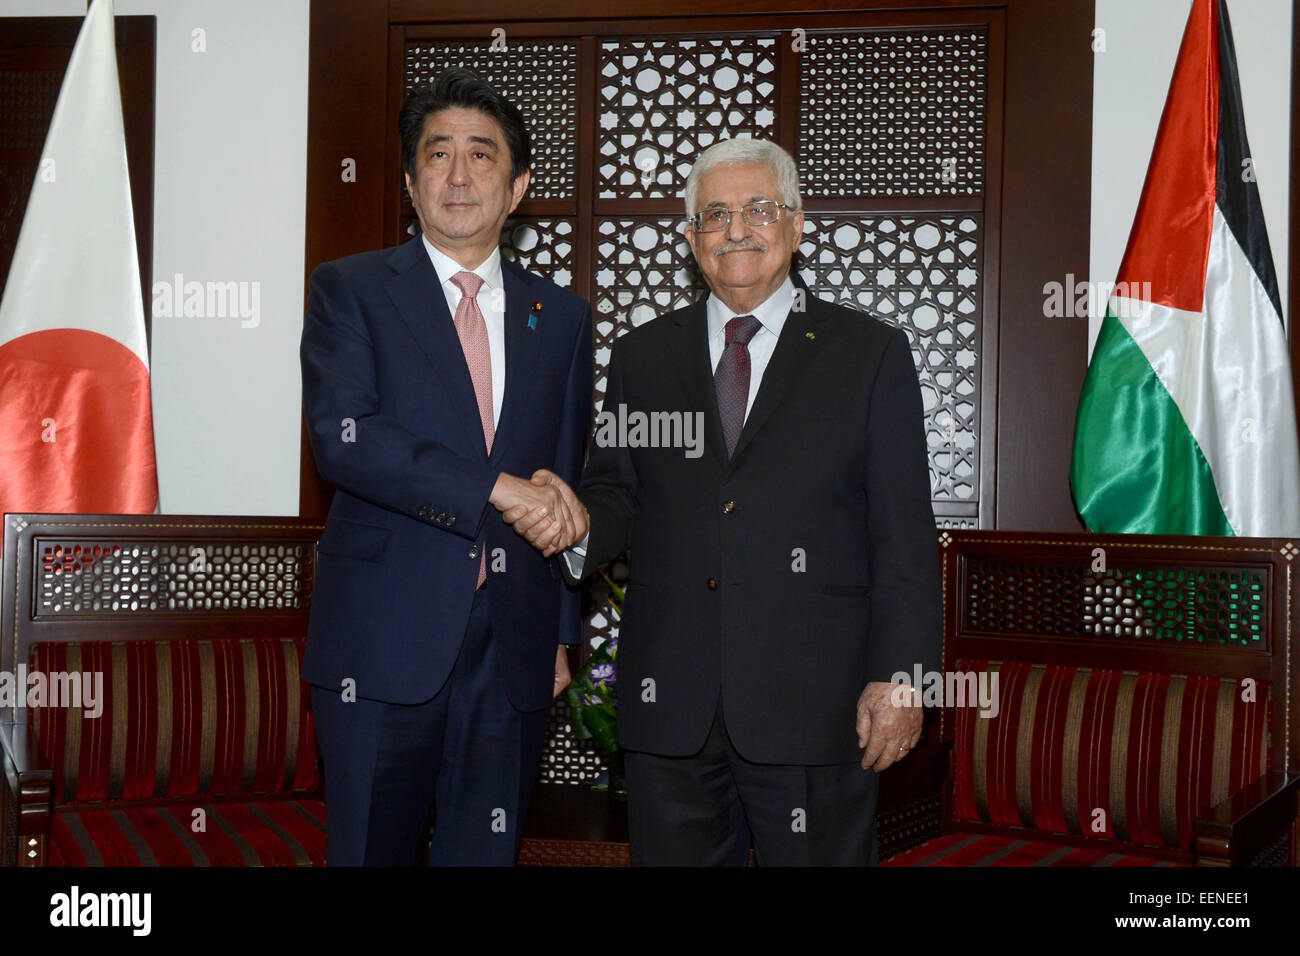 Ramallah. 20th Jan, 2015. Japan's Prime Minister Shinzo Abe (L) shakes hands with Palestinian President Mahmoud Abbas during their meeting in the West Bank city of Ramallah on Jan. 20, 2015. © Pool/Xinhua/Alamy Live News Stock Photo